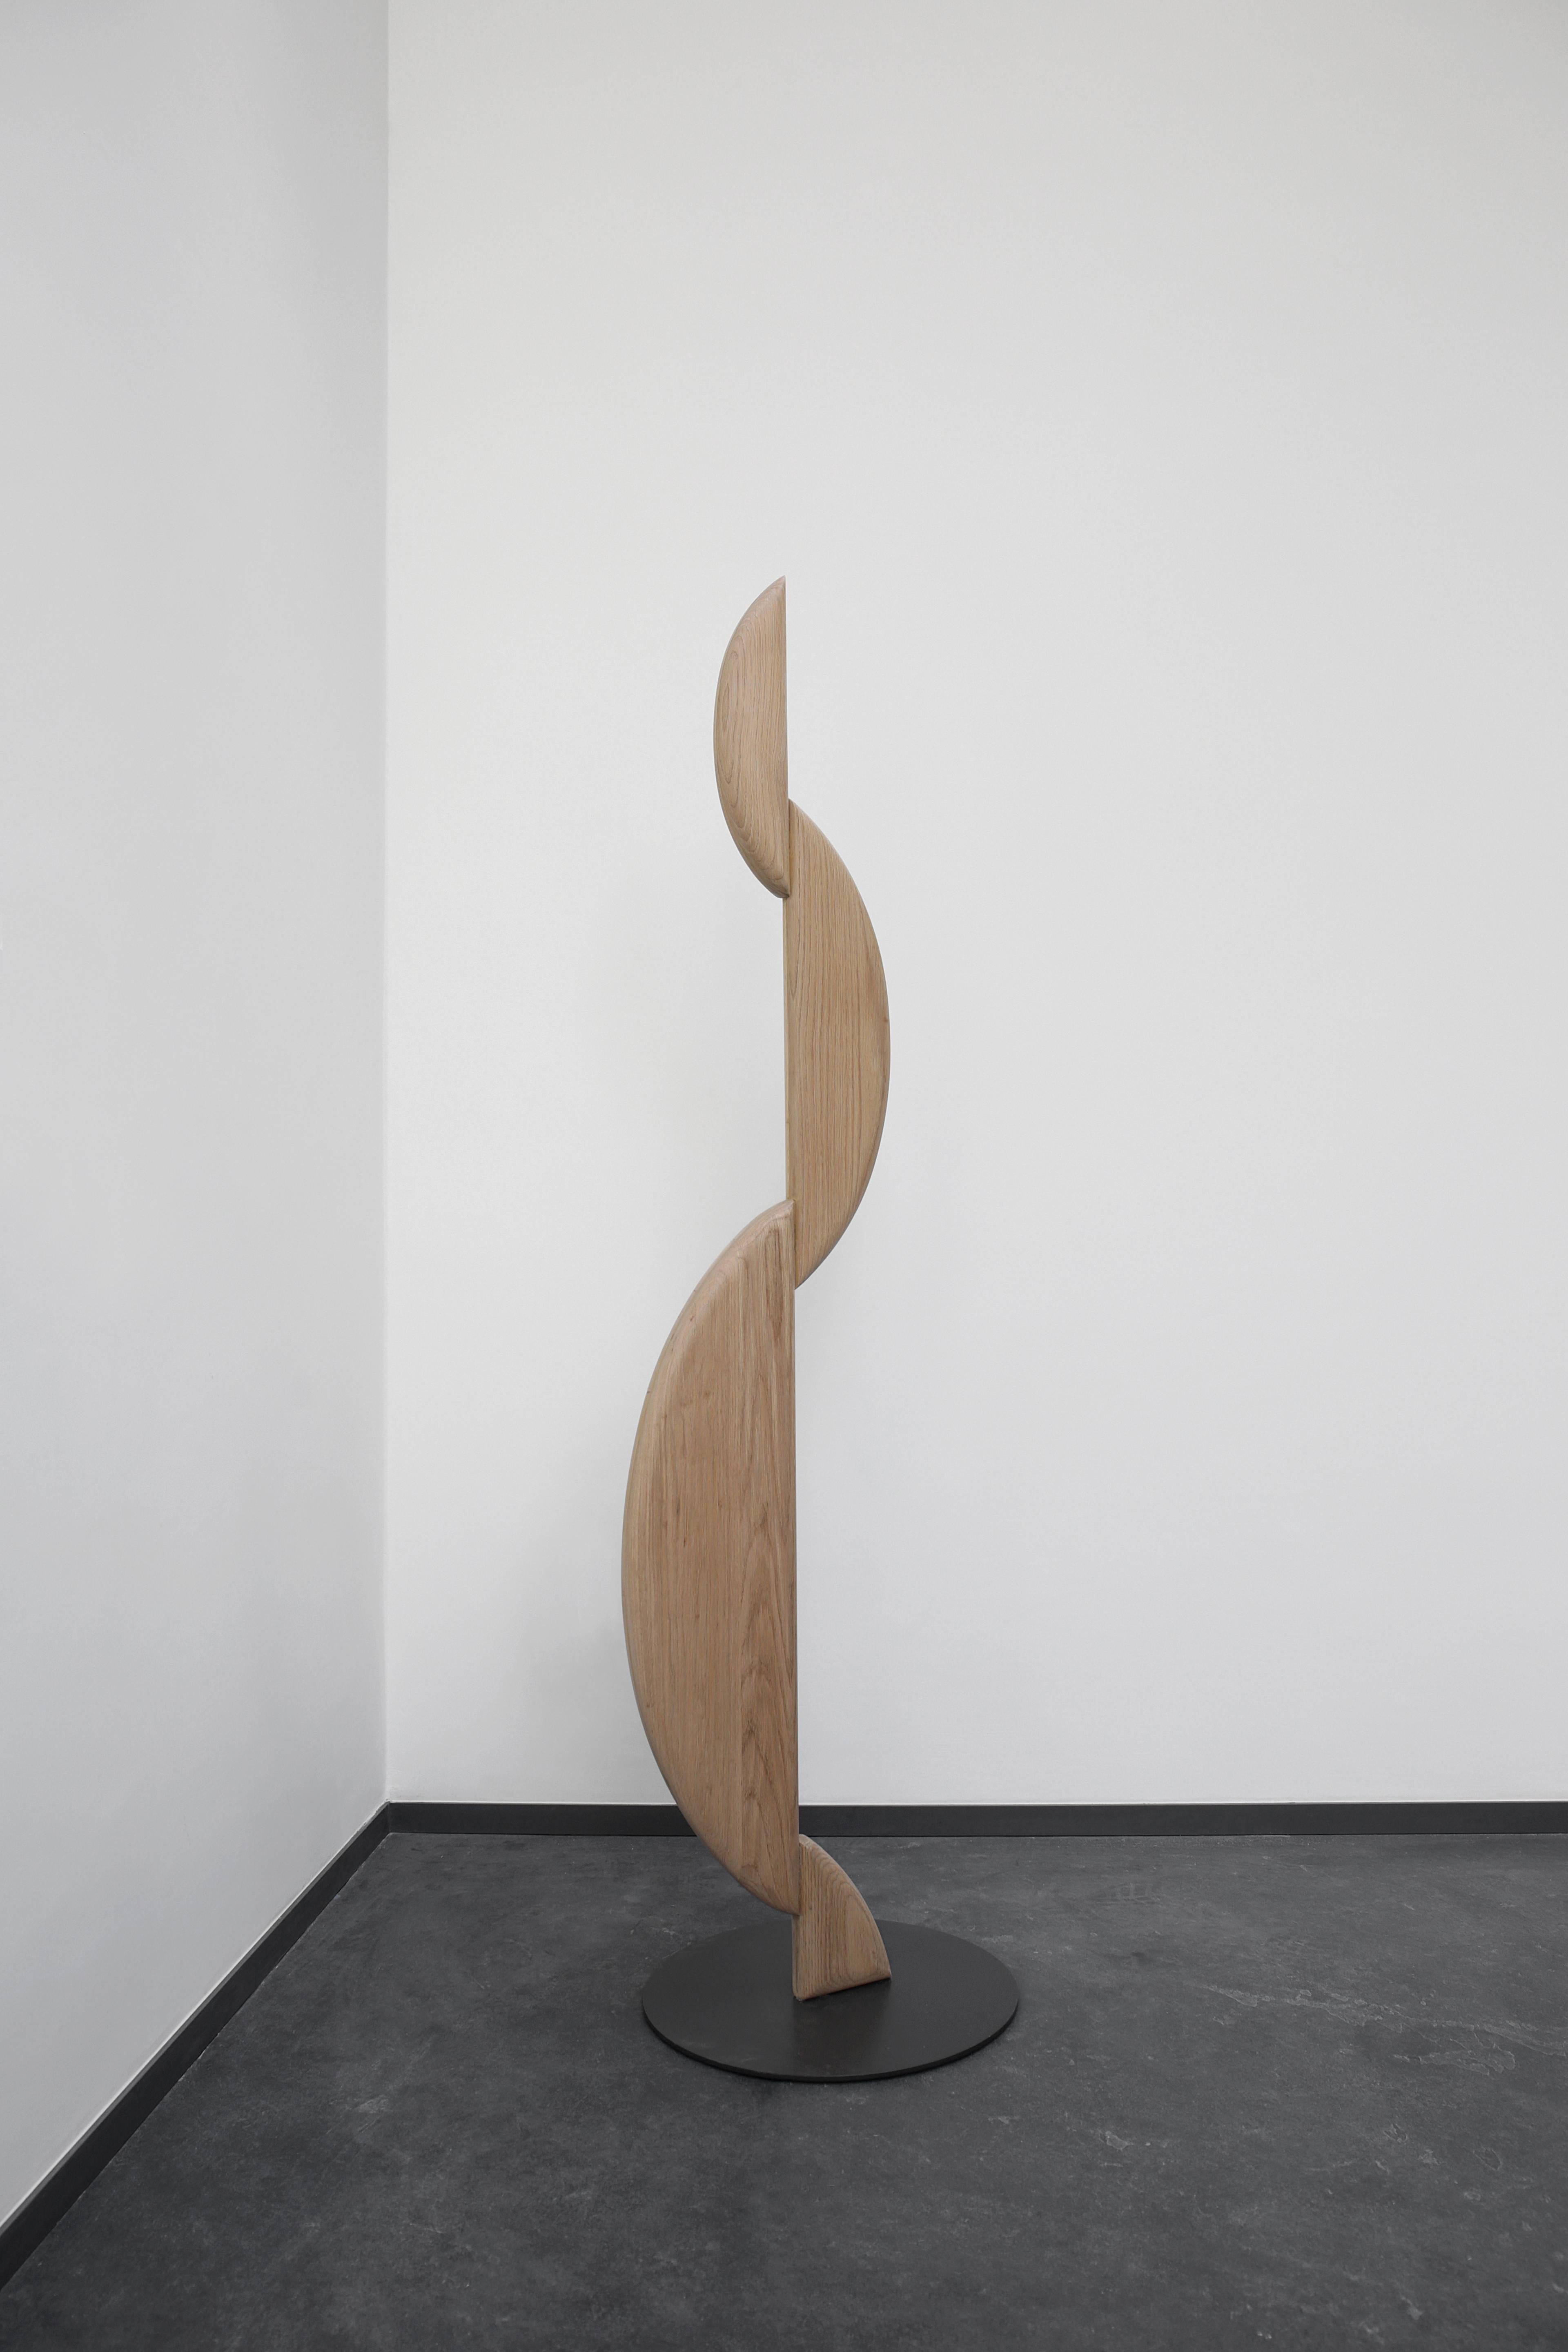 Noviembre II standing sculpture inspired in Brancusi, in burn solid wood by Joel Escalona.

The Noviembre collection is inspired by the creative values of Constantin Brancusi, a Romanian sculptor considered one of the most influential artists of